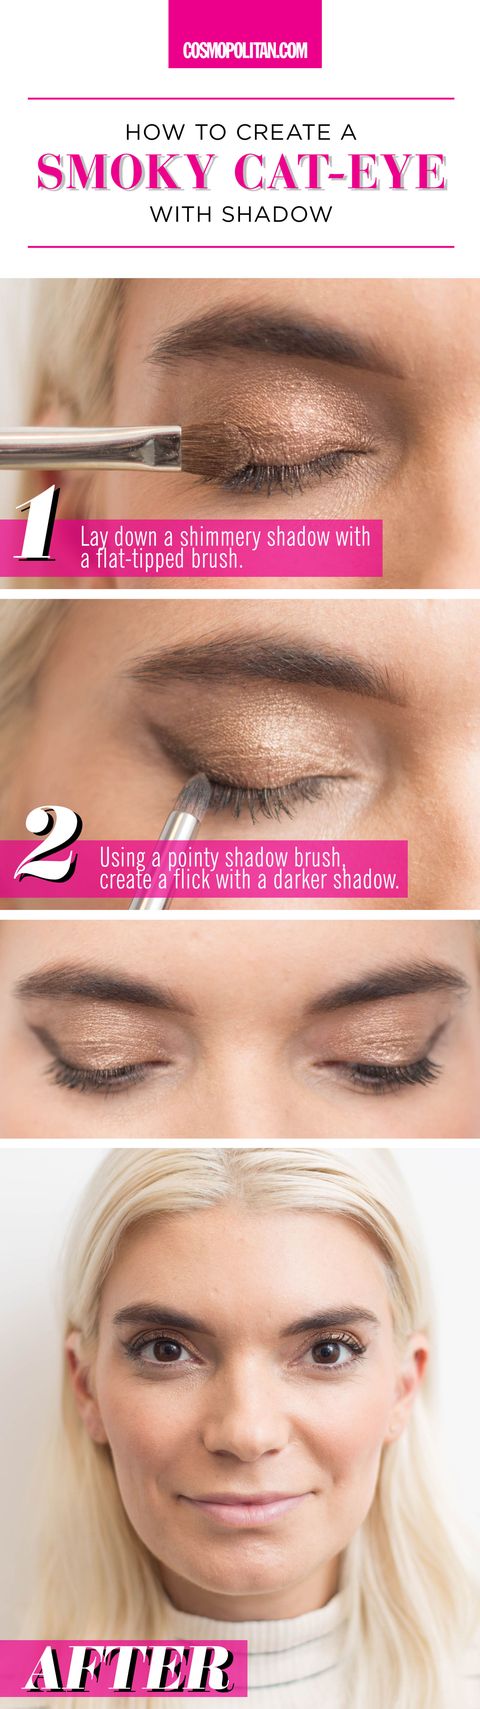 5 Faster Ways to Do Your Favorite Makeup Looks